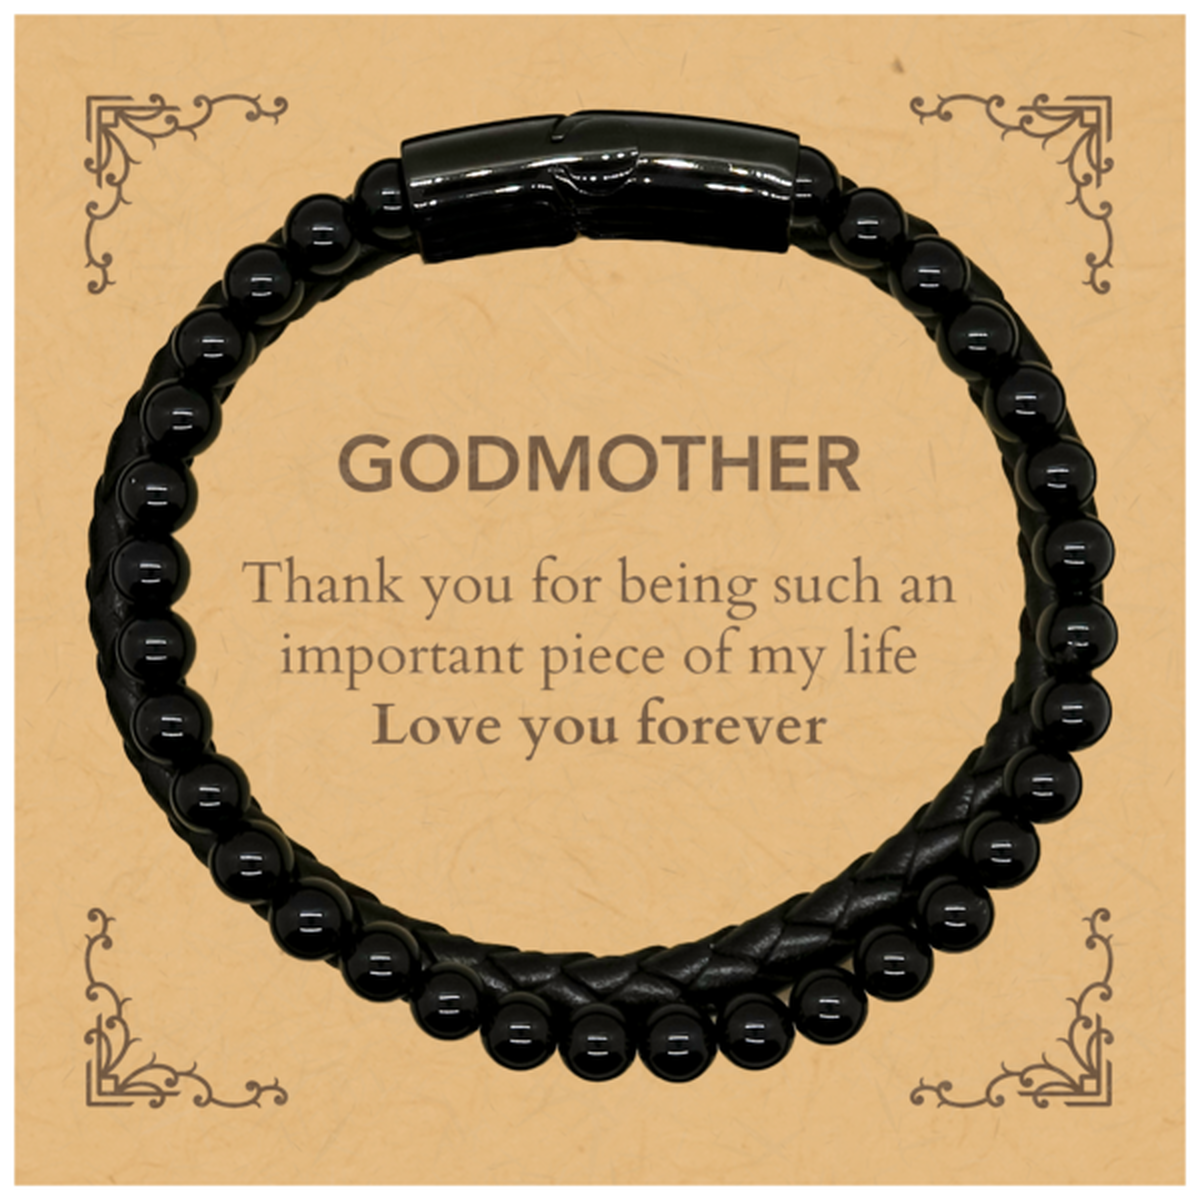 Appropriate Godmother Stone Leather Bracelets Epic Birthday Gifts for Godmother Thank you for being such an important piece of my life Godmother Christmas Mothers Fathers Day